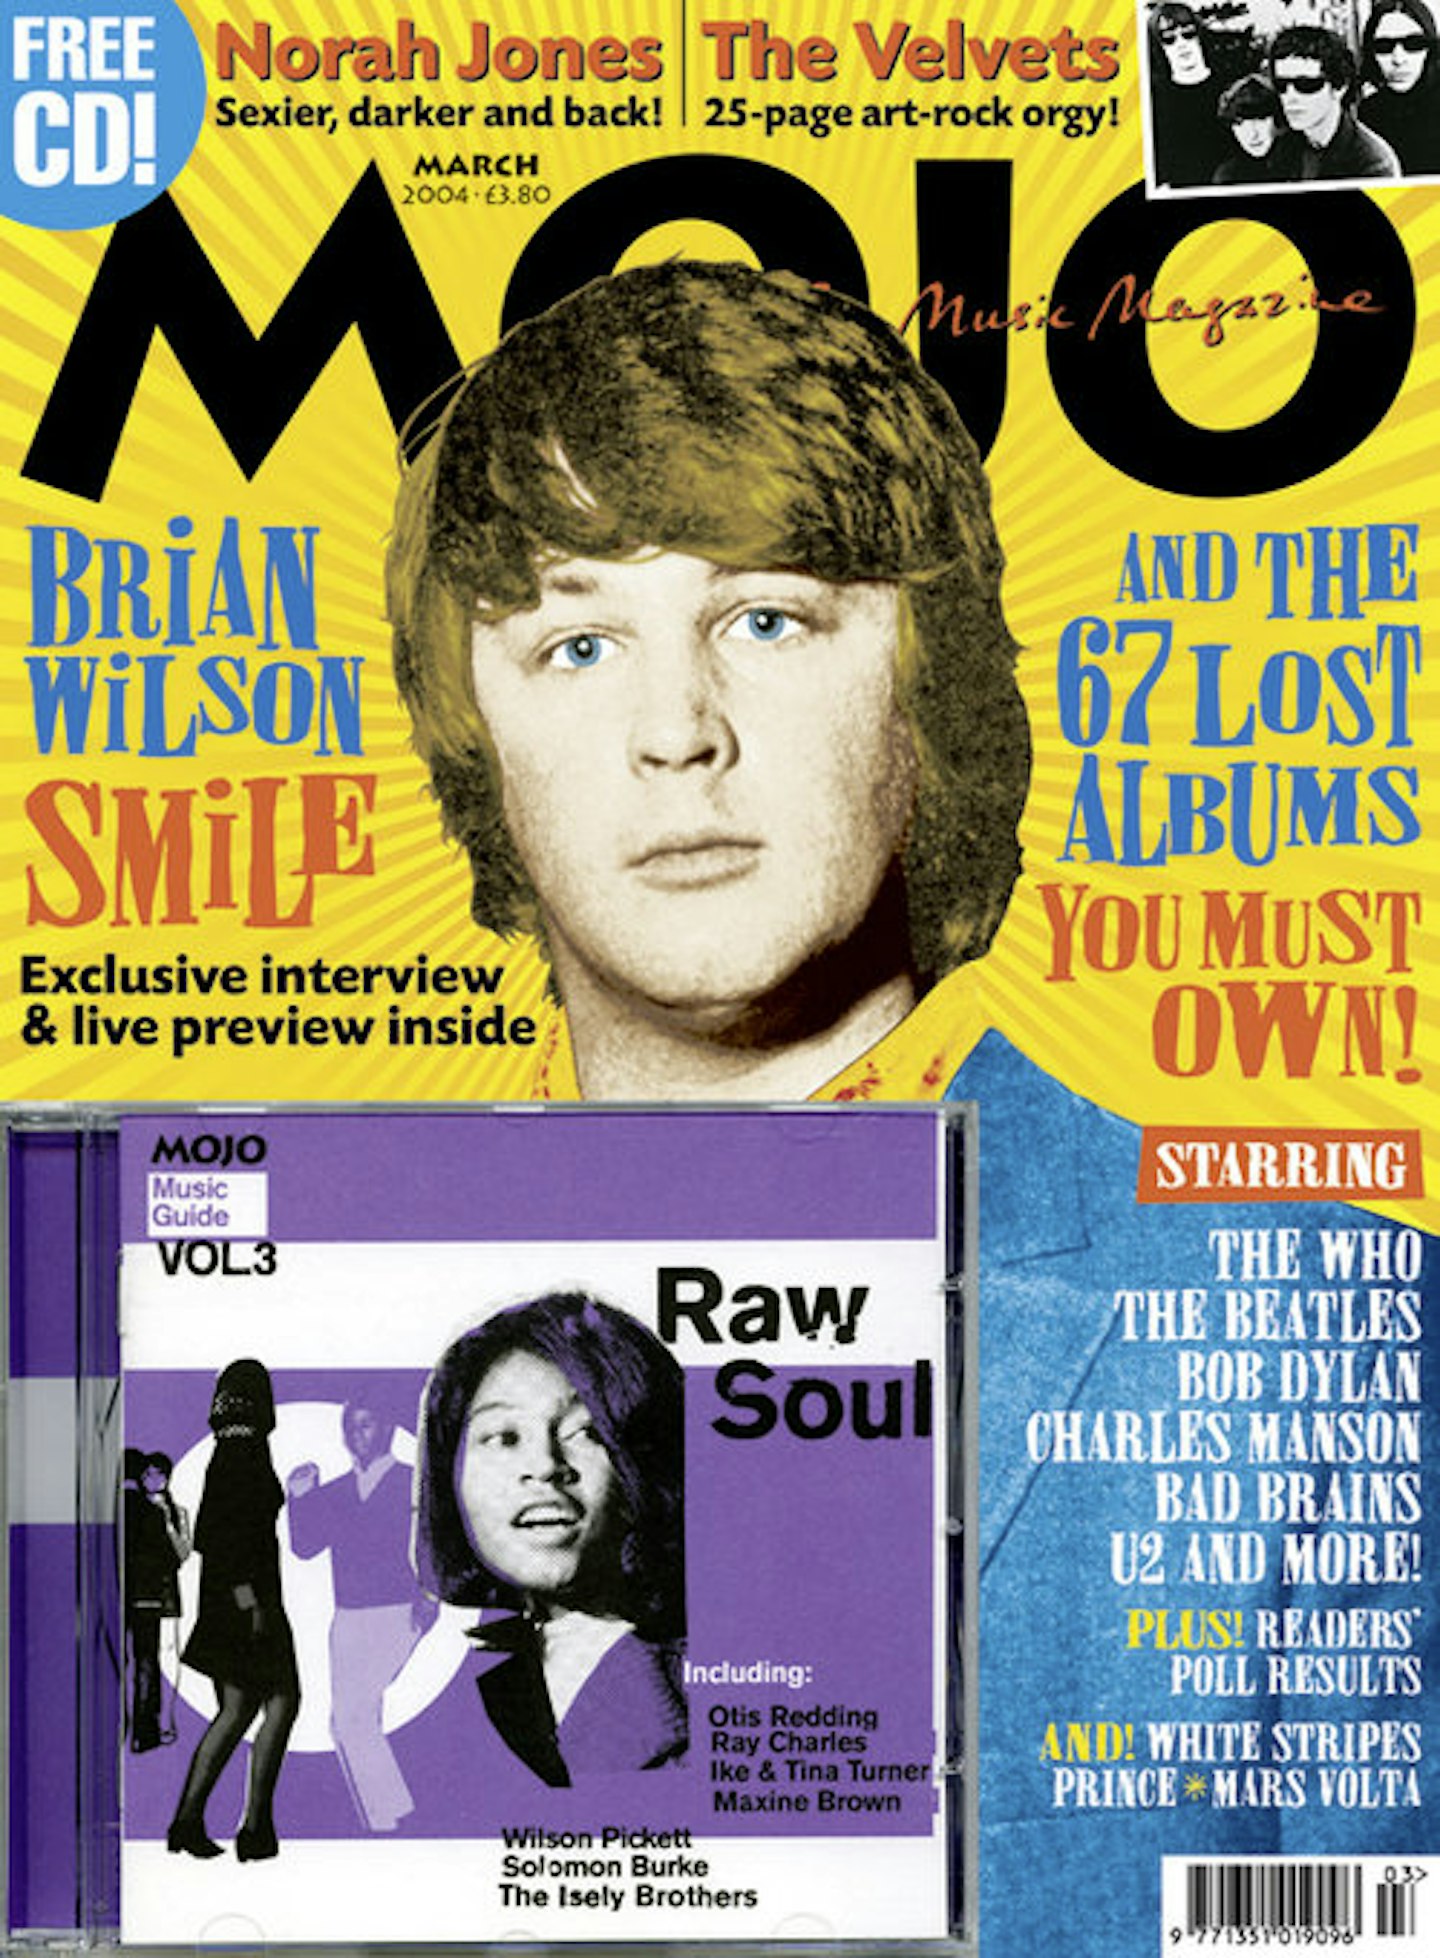 MOJO Issue 124 / March 2004